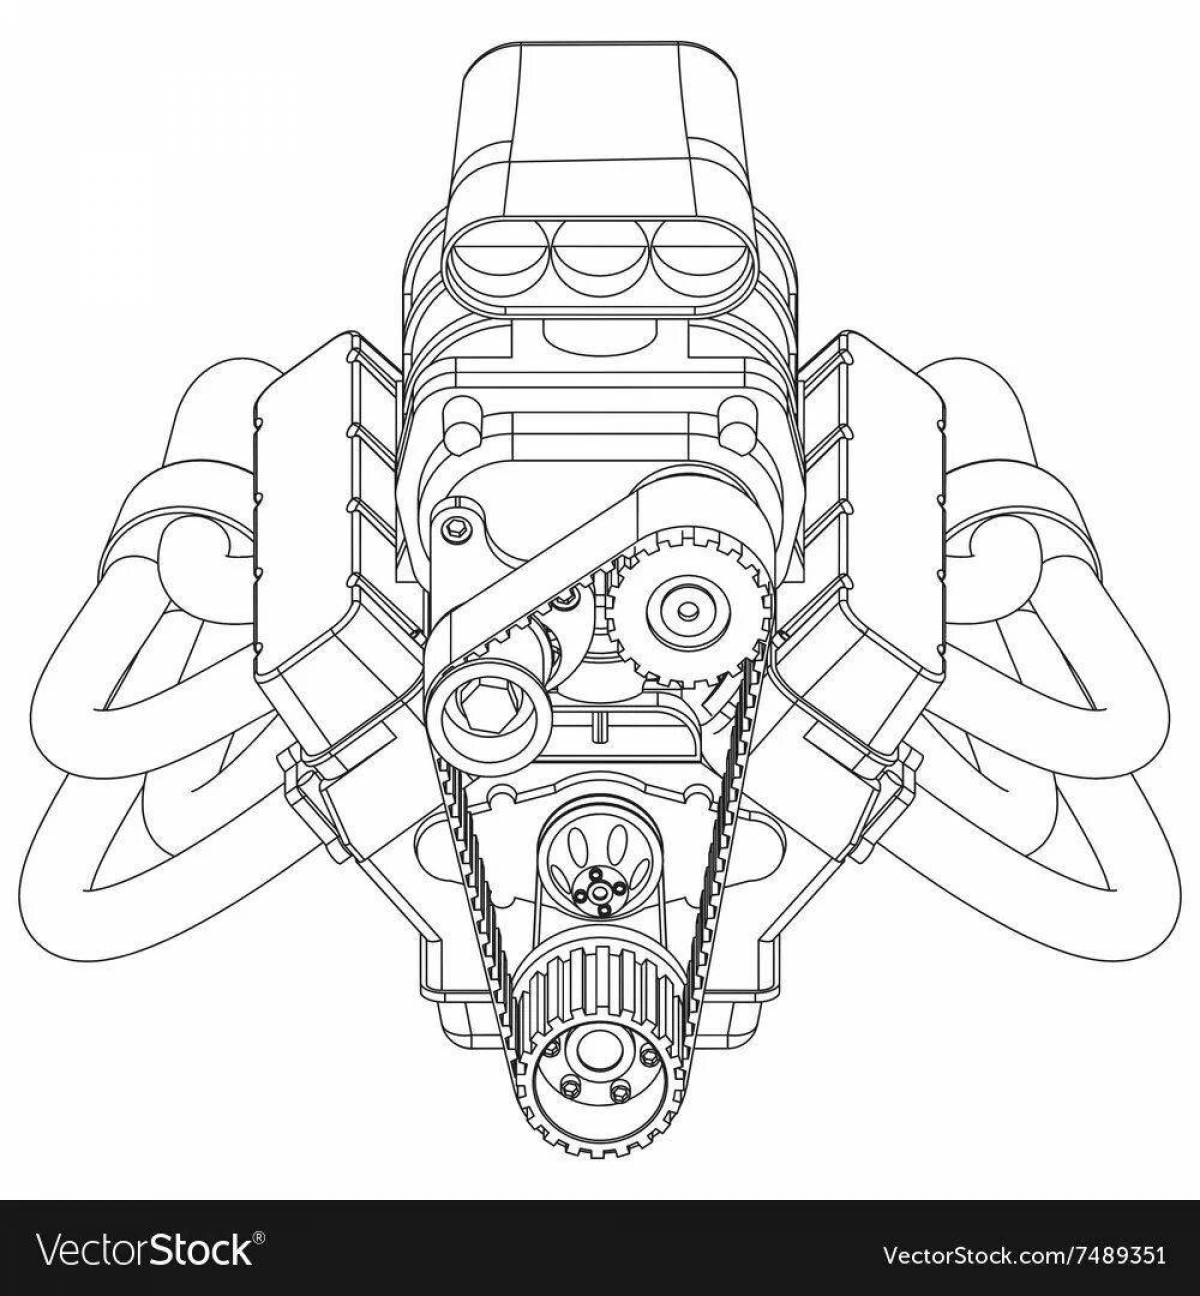 Dynamic engine coloring page